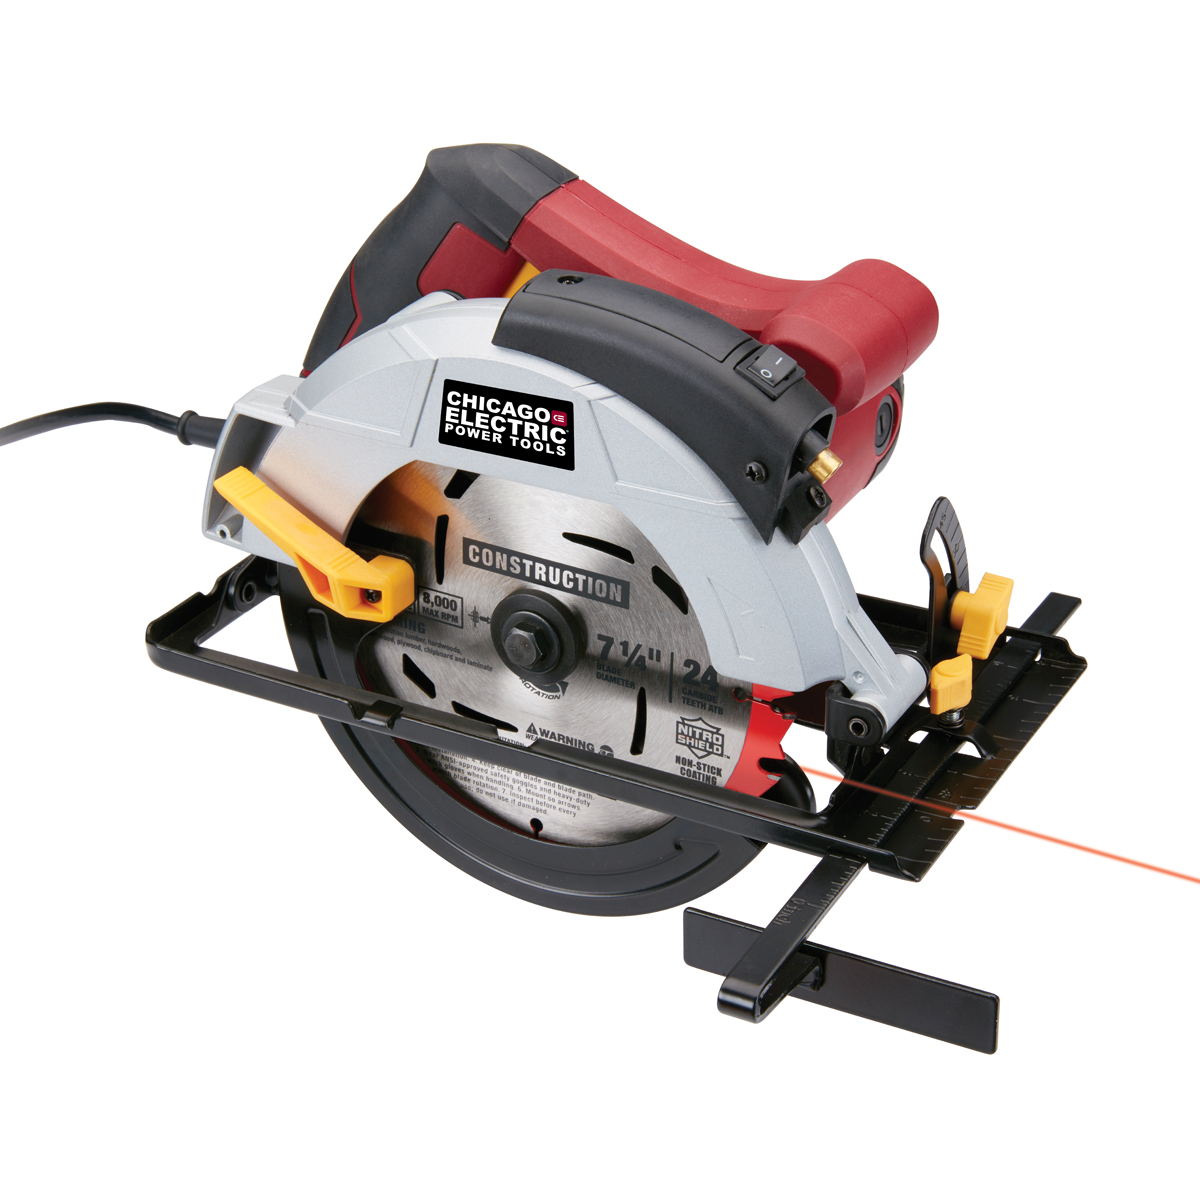 CHICAGO ELECTRIC 7-1/4 in. 12 Amp Circular Saw with Laser Guide System